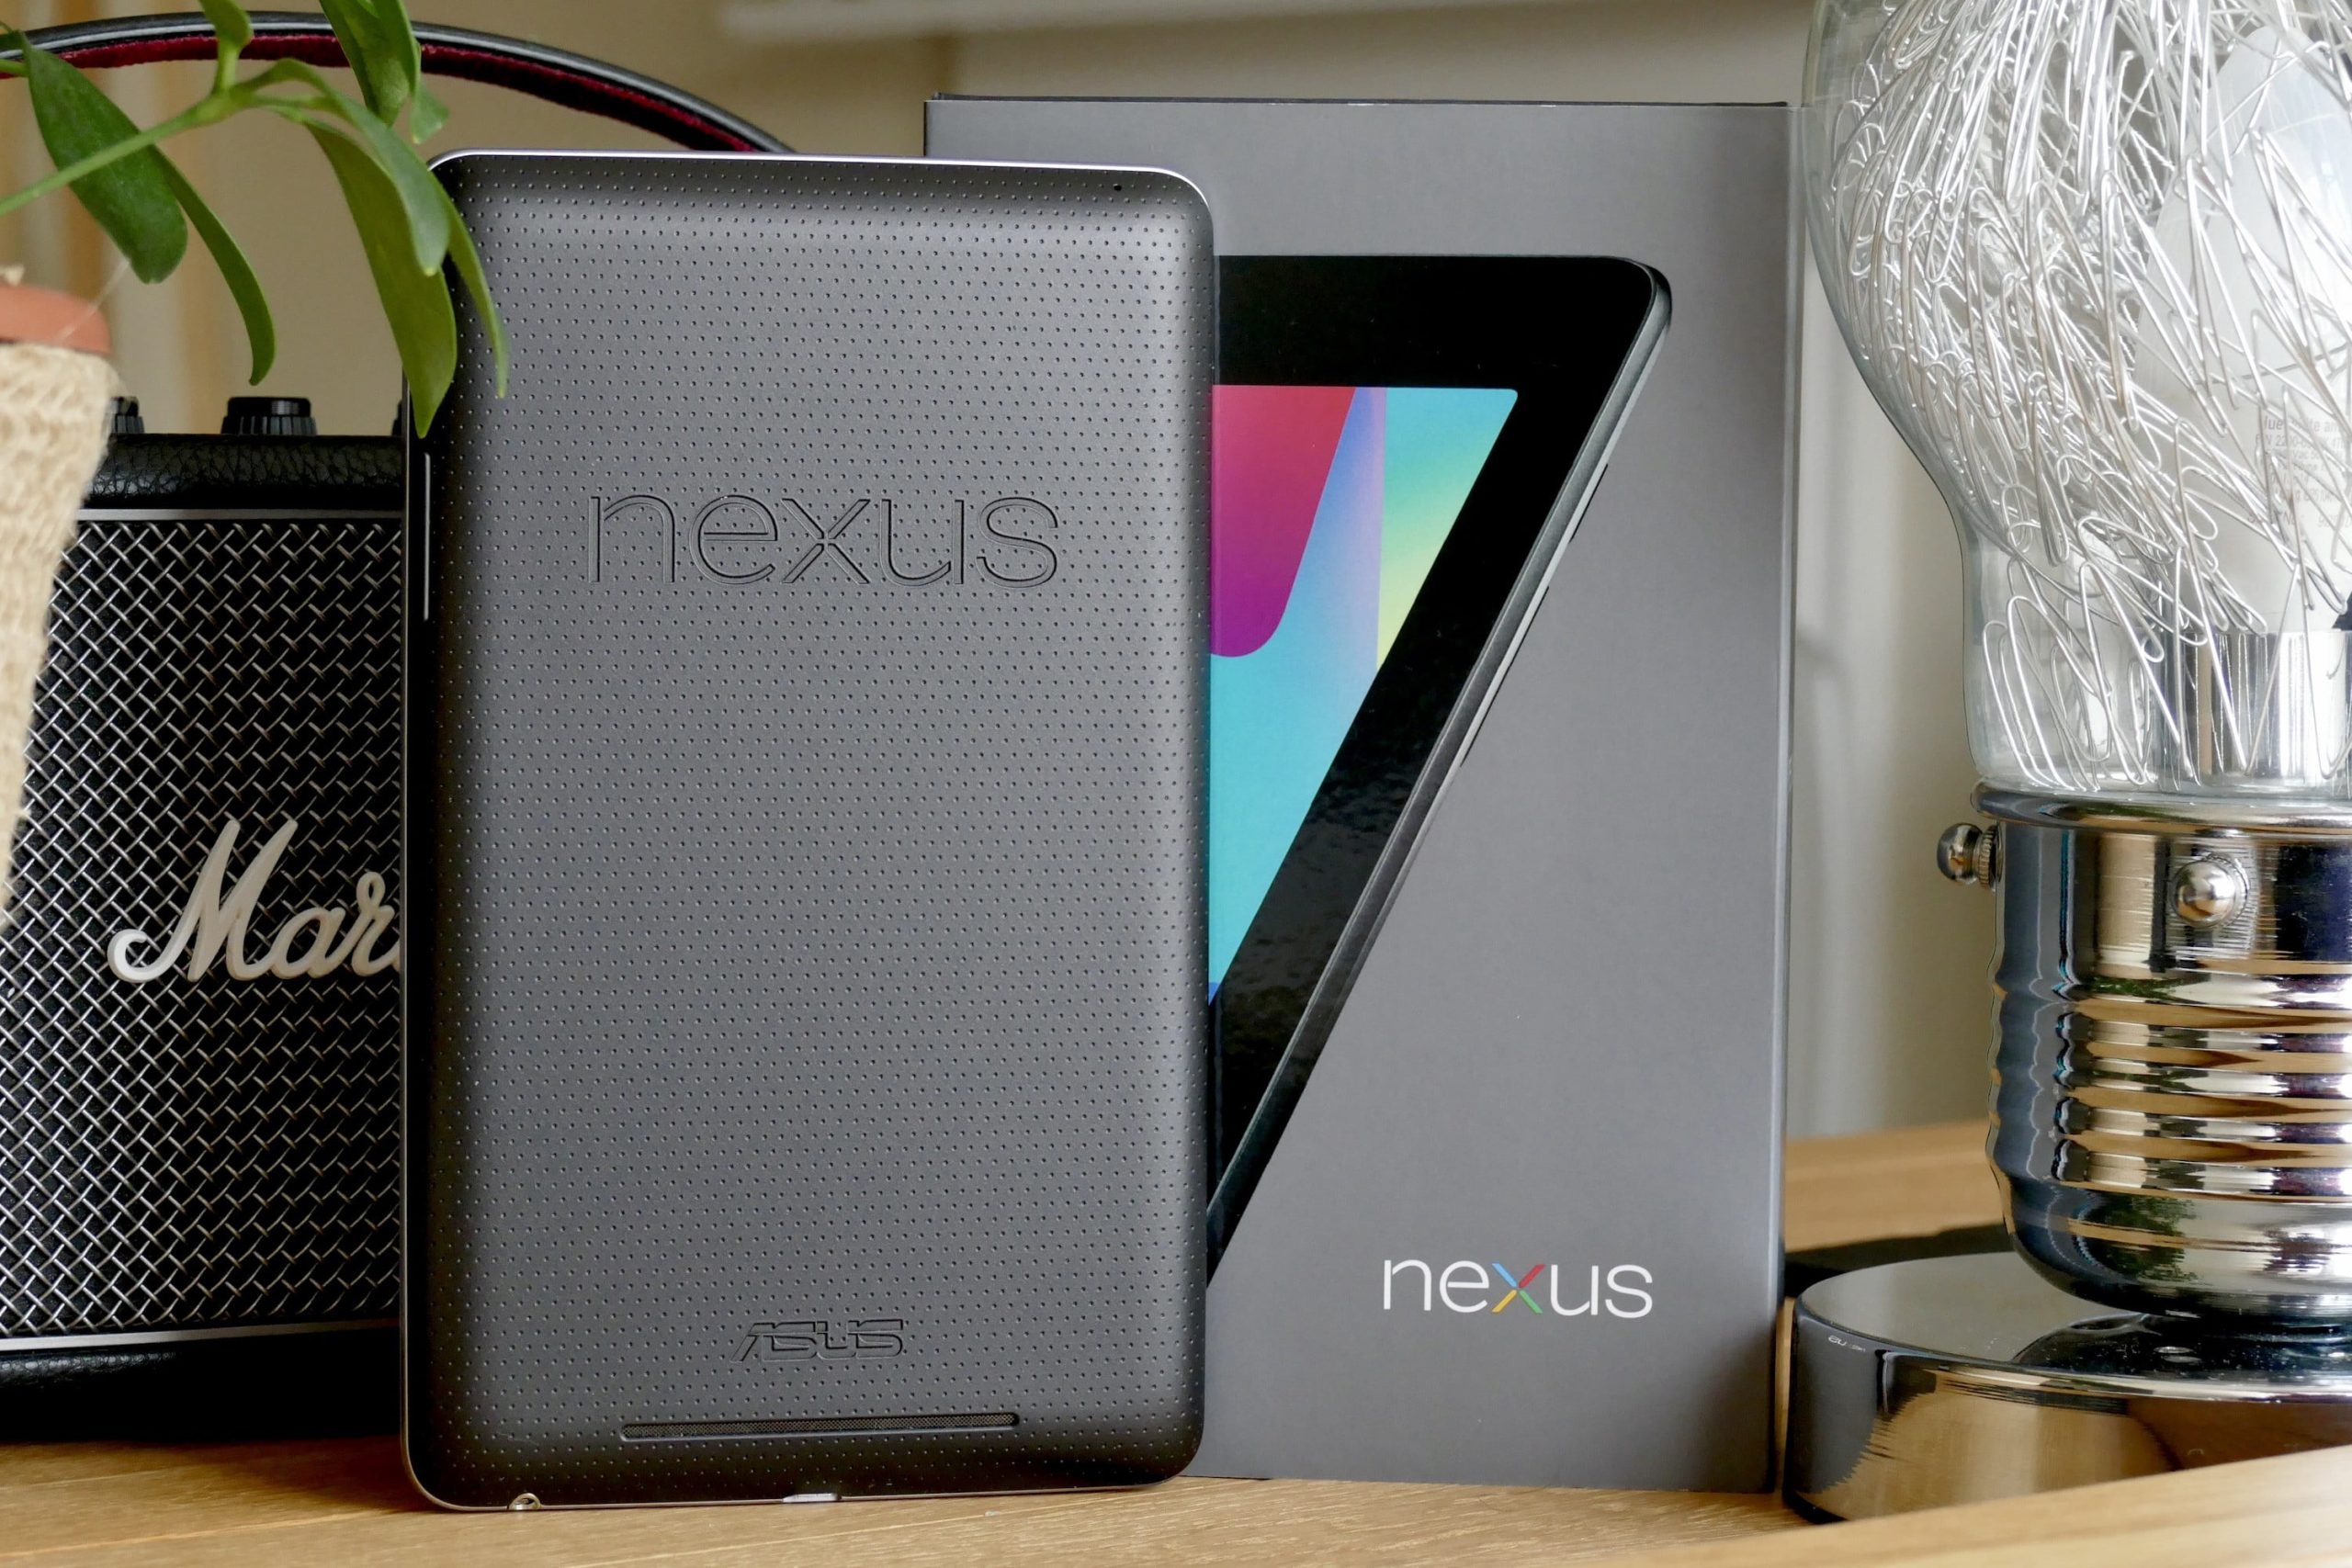 The Nexus 7 was once the very best right-place, right-time product | Virtual Tendencies